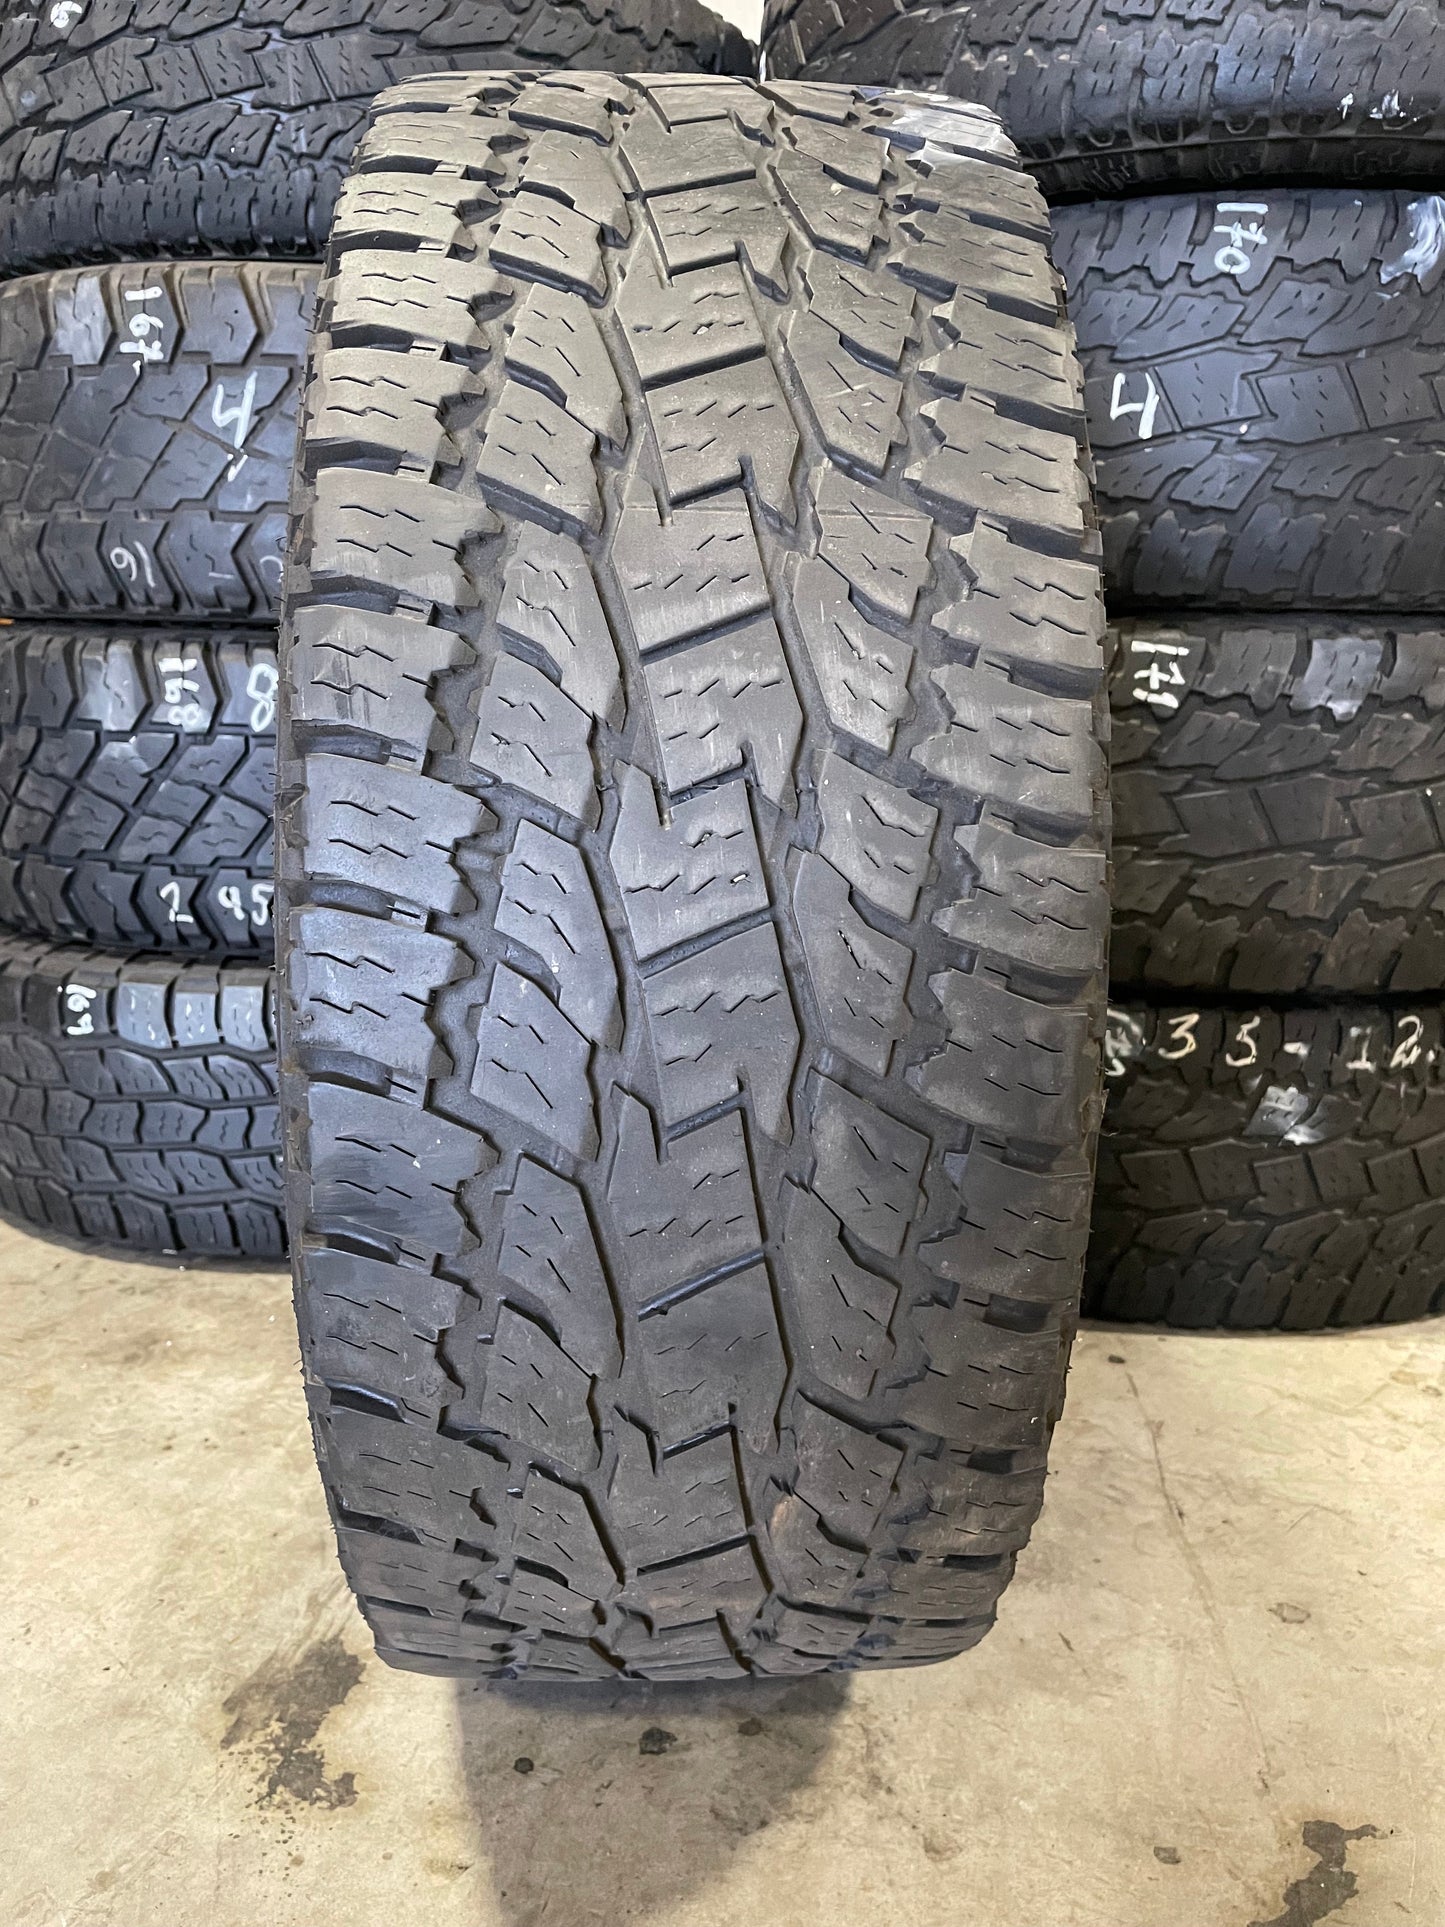 SINGLE 295/60R20 Toyo Open Country Xtreme 126/123 S E - Used Tires